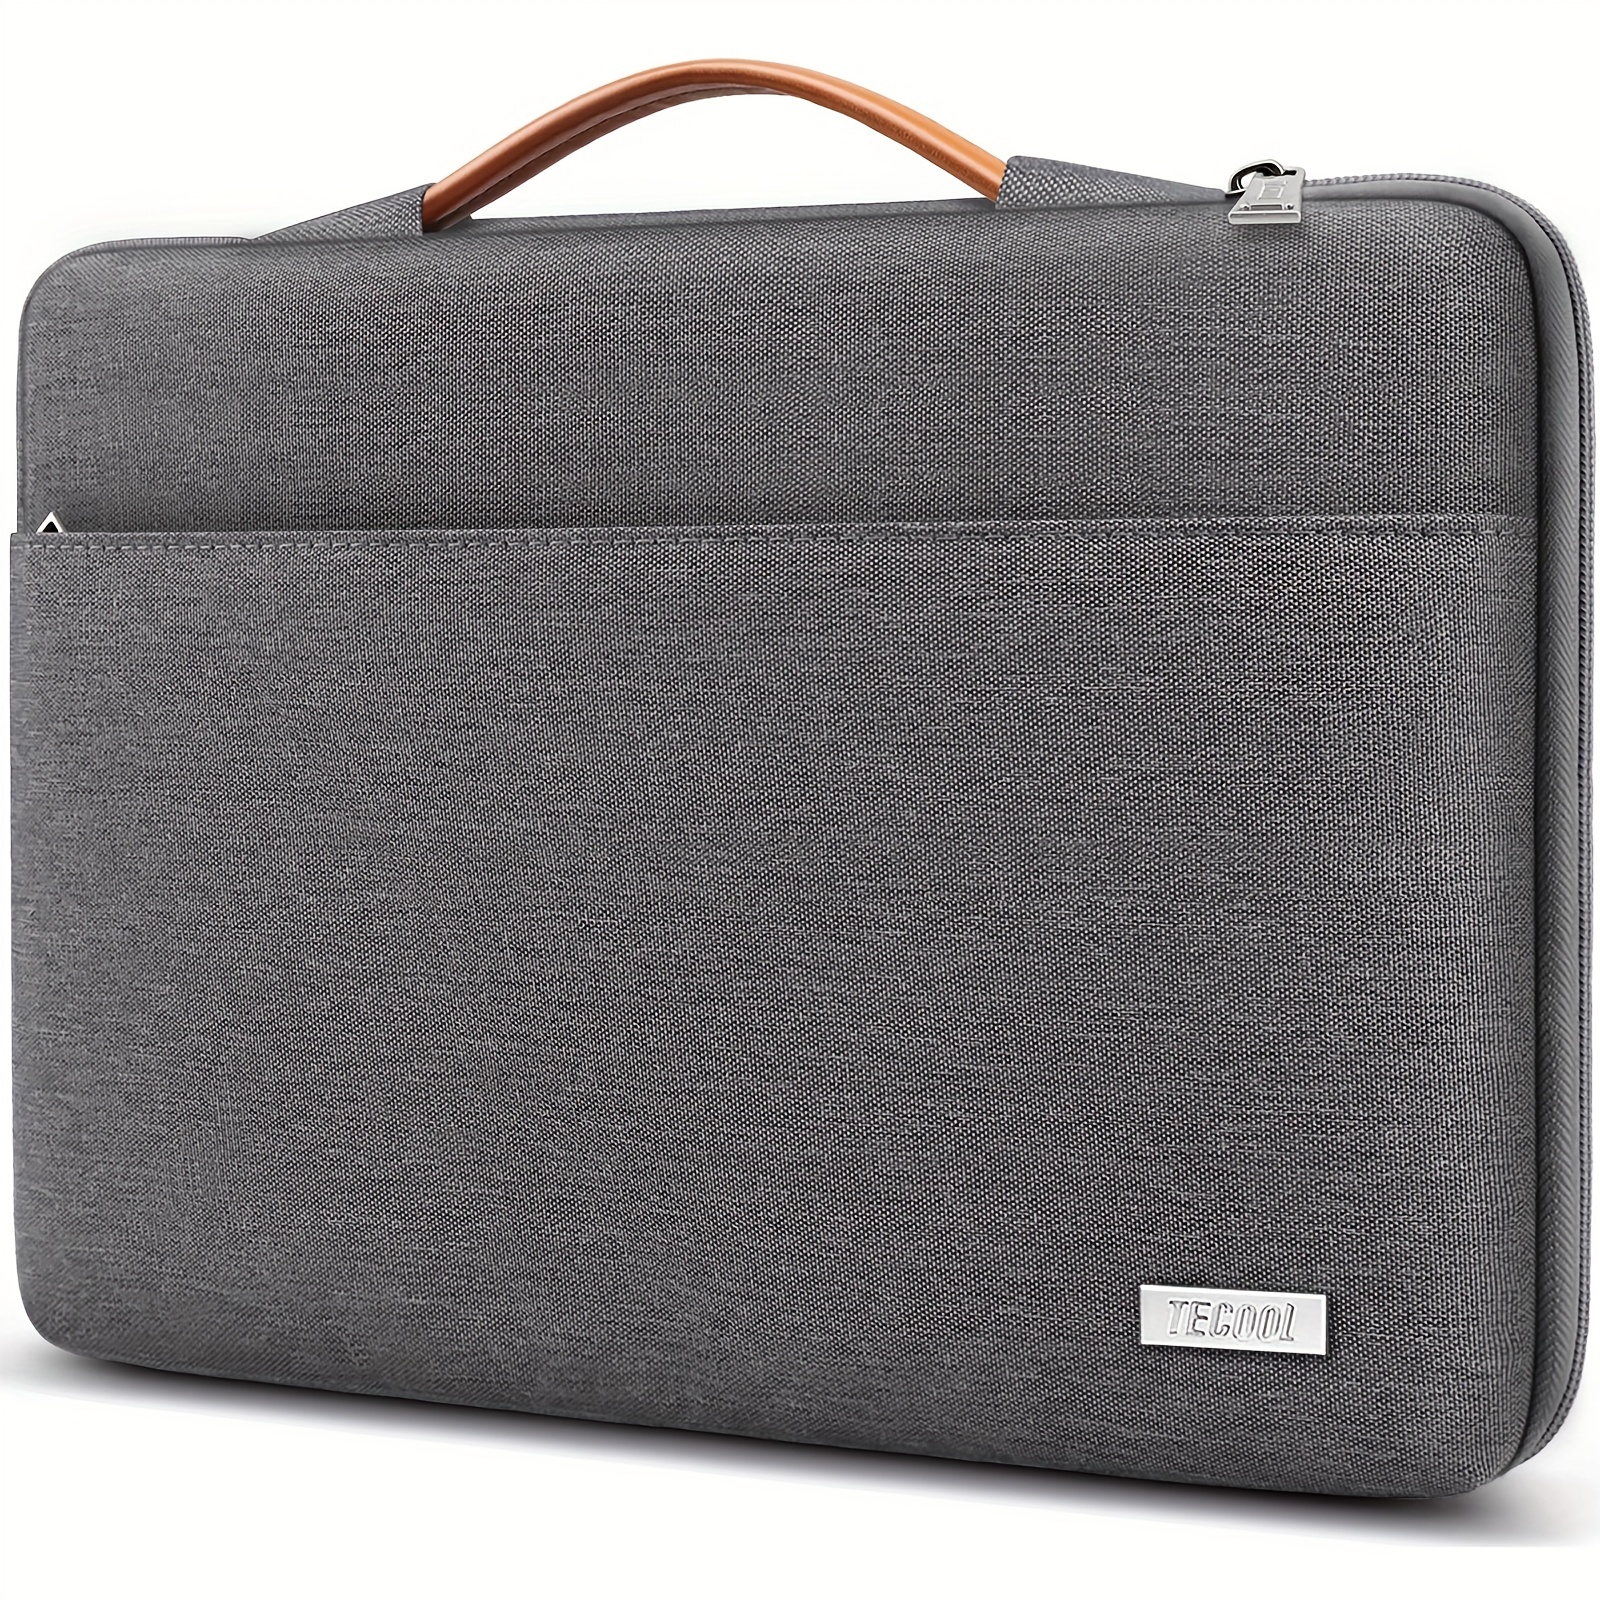 MacBook Air 15 M2 Laptop Case with Handle - Stylish Protection